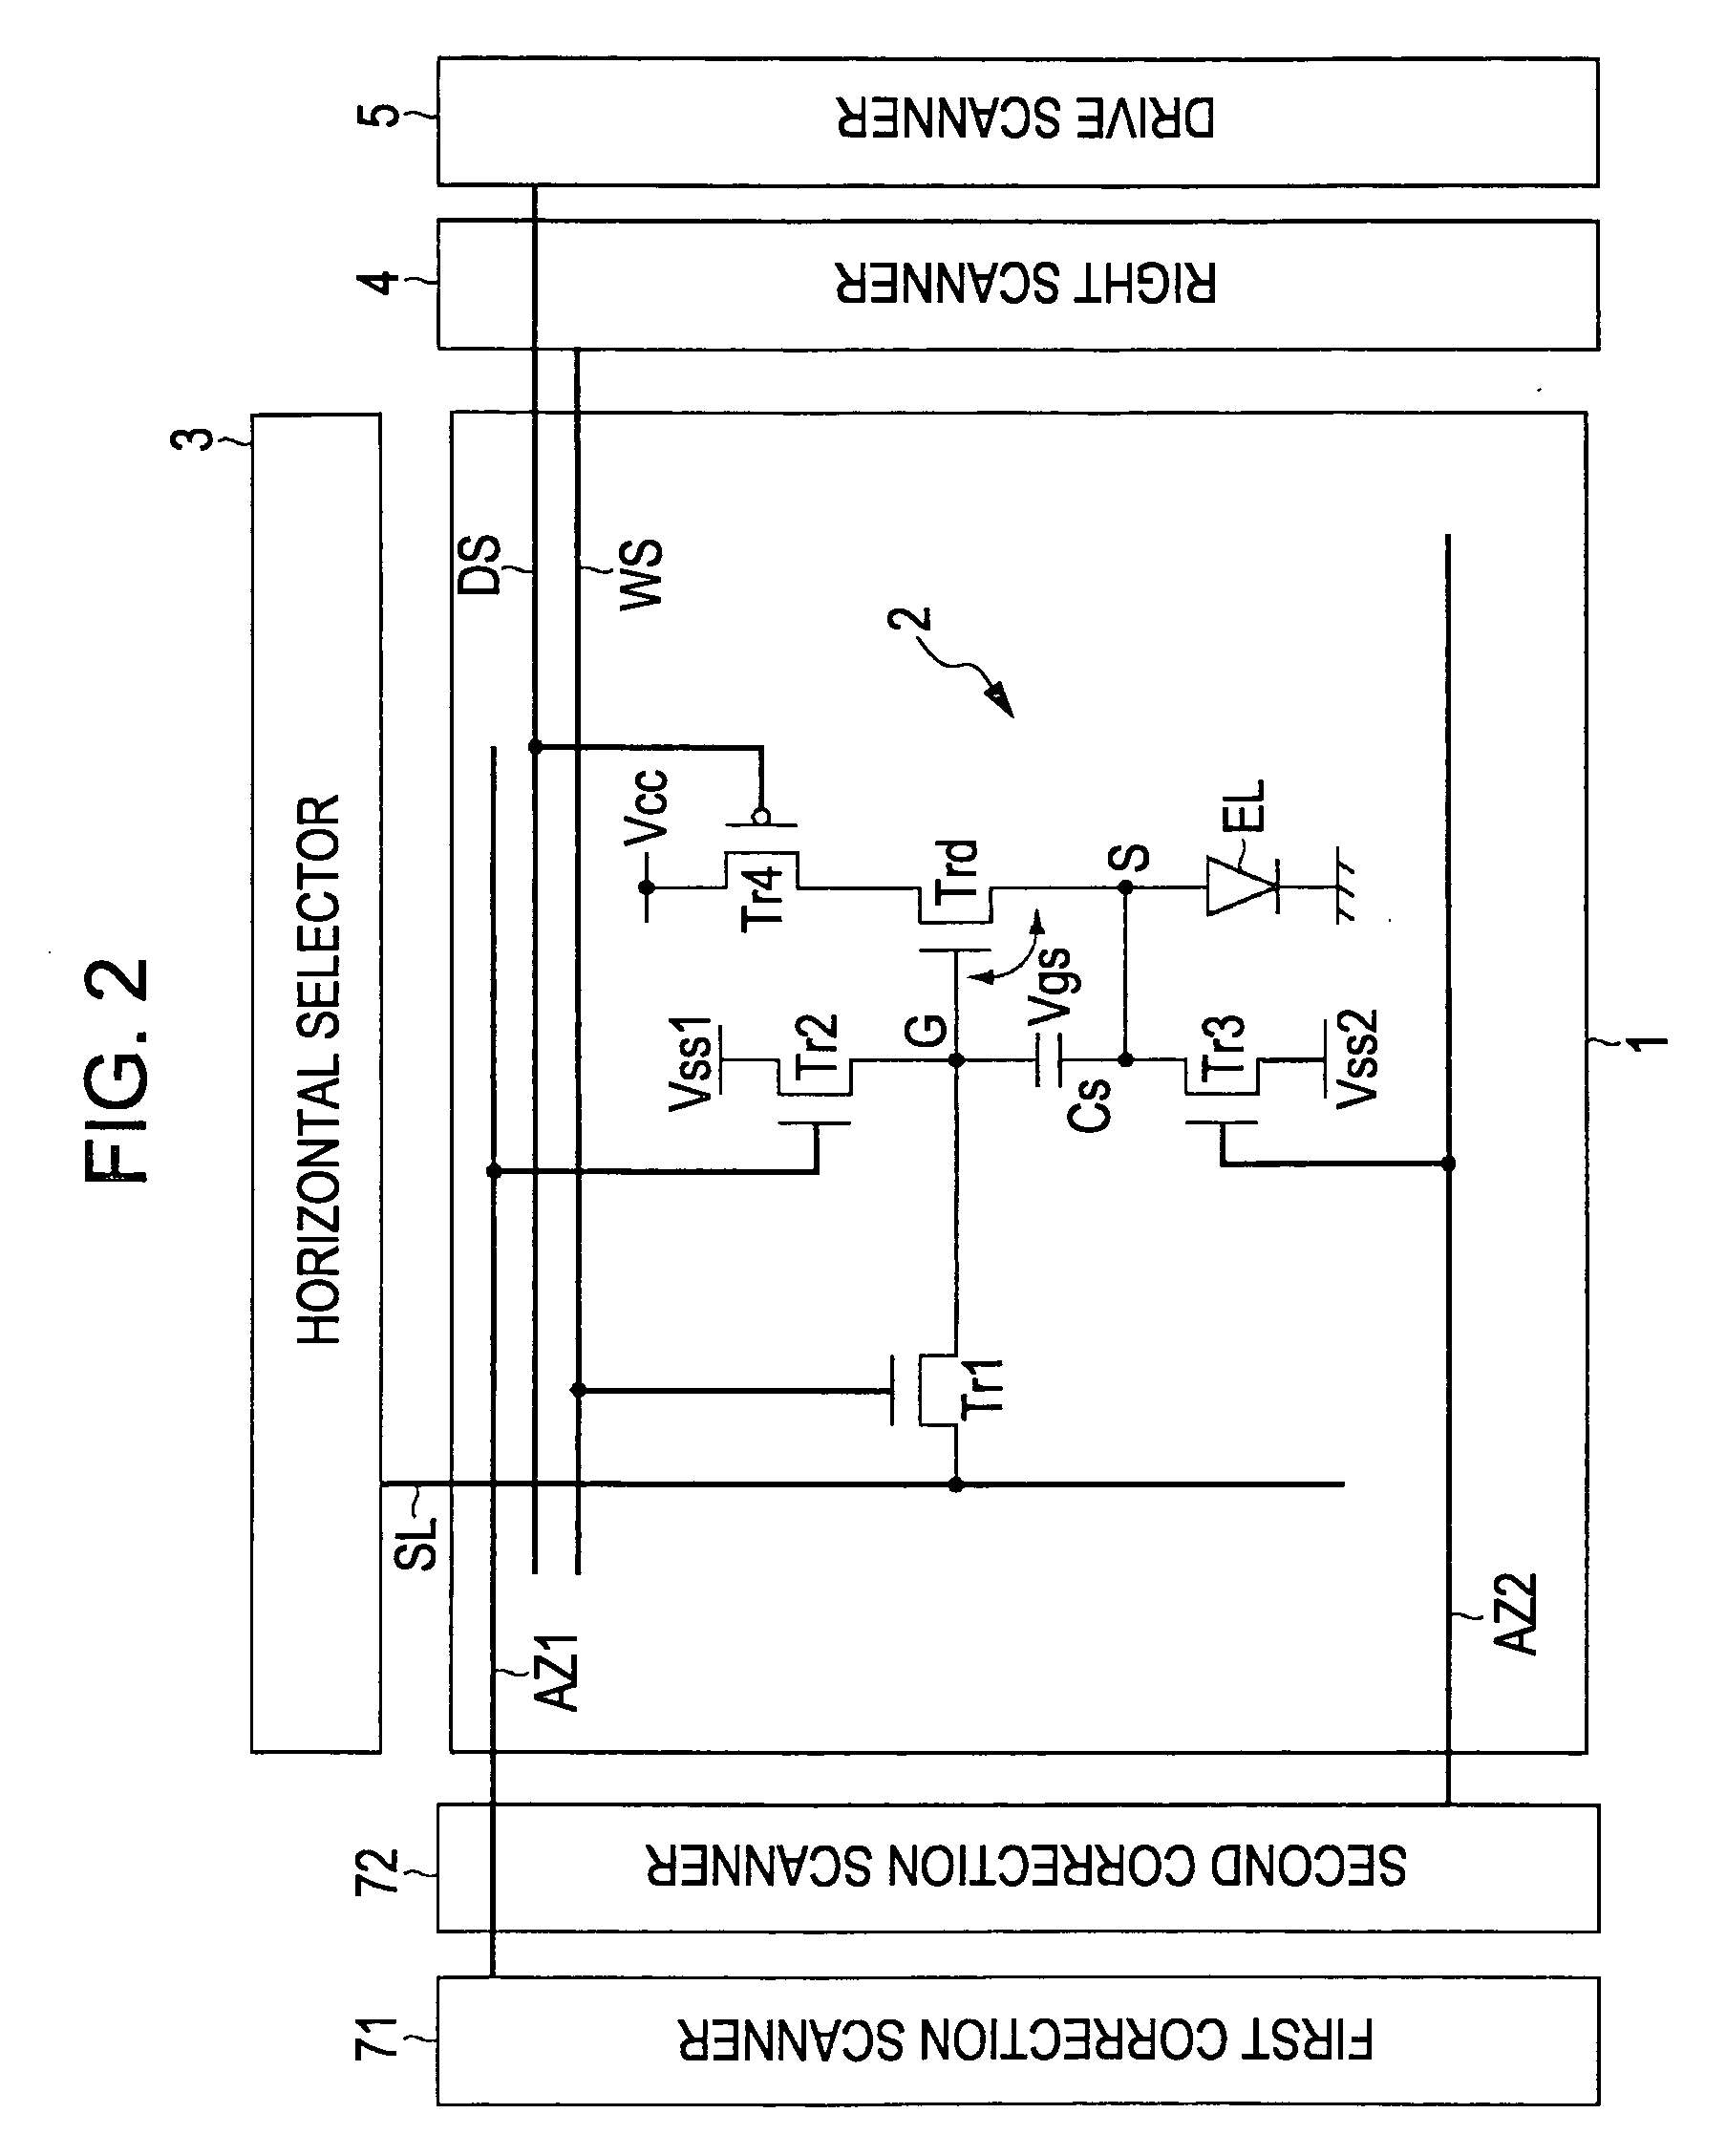 Display apparatus, method of driving a display, and electronic device